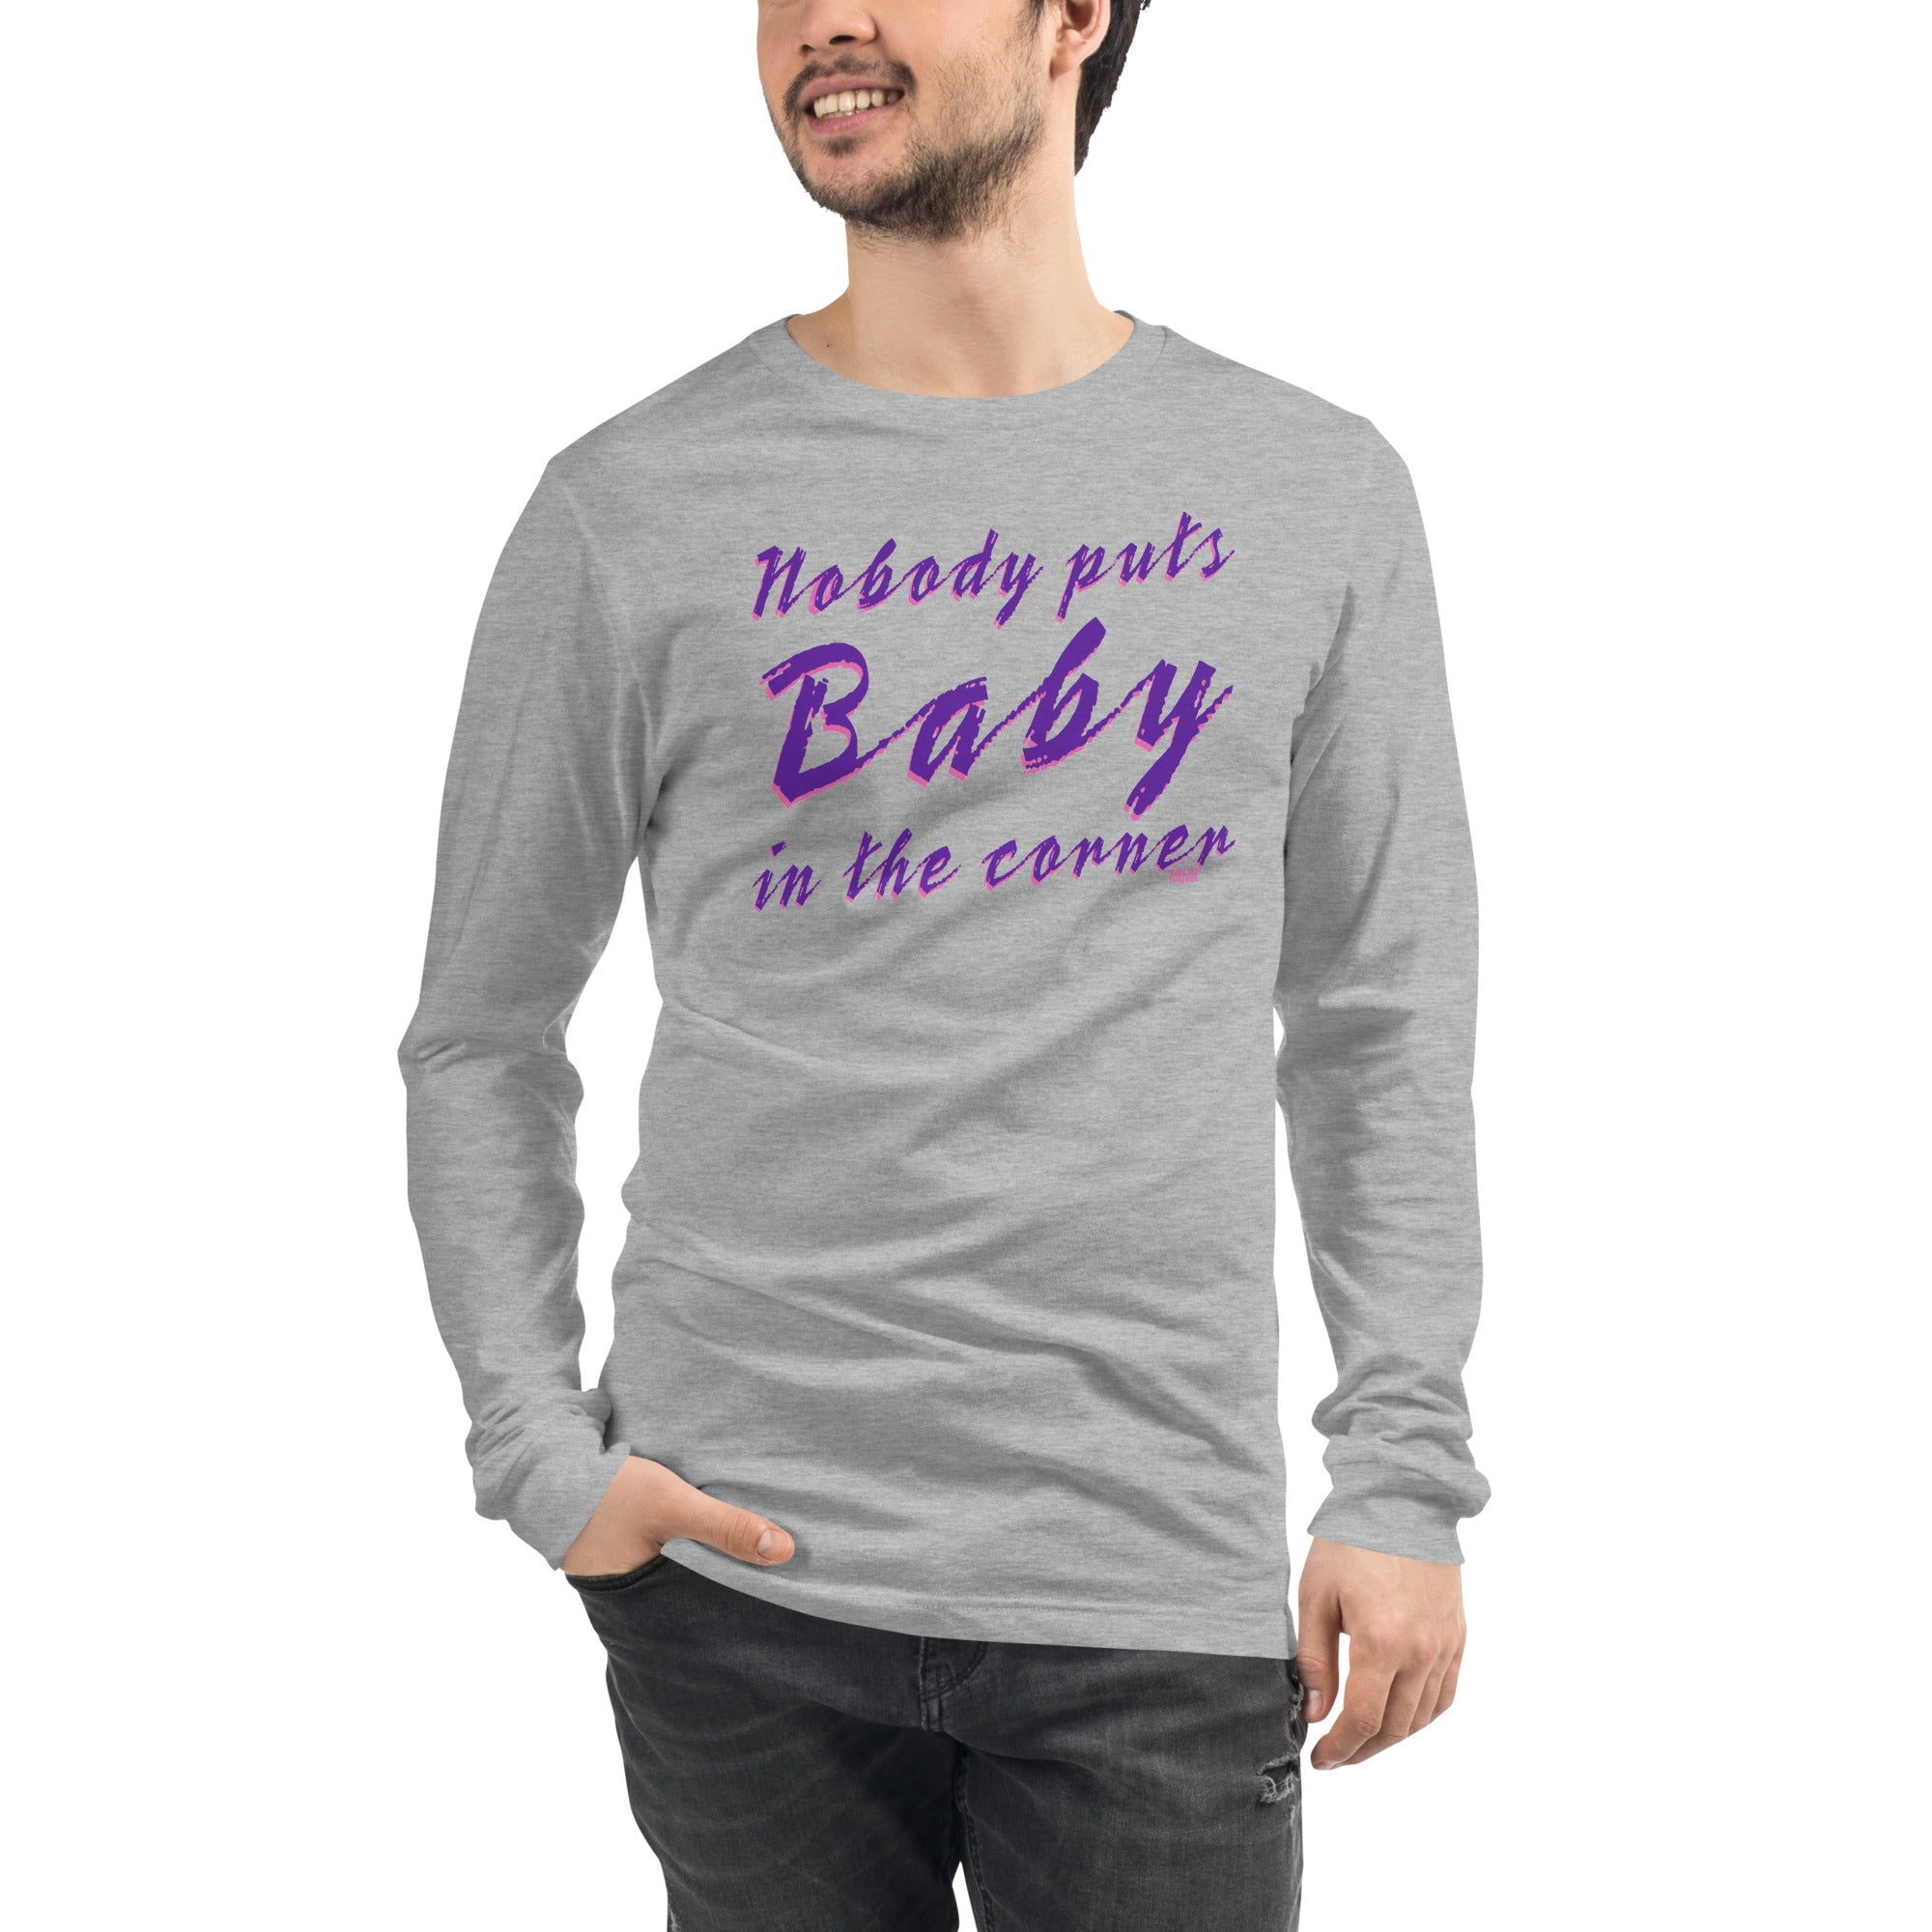 Nobody Puts Baby In The Corner Vintage Long Sleeve T Shirt | Retro 80S Movie Graphic Tee | Solid Threads